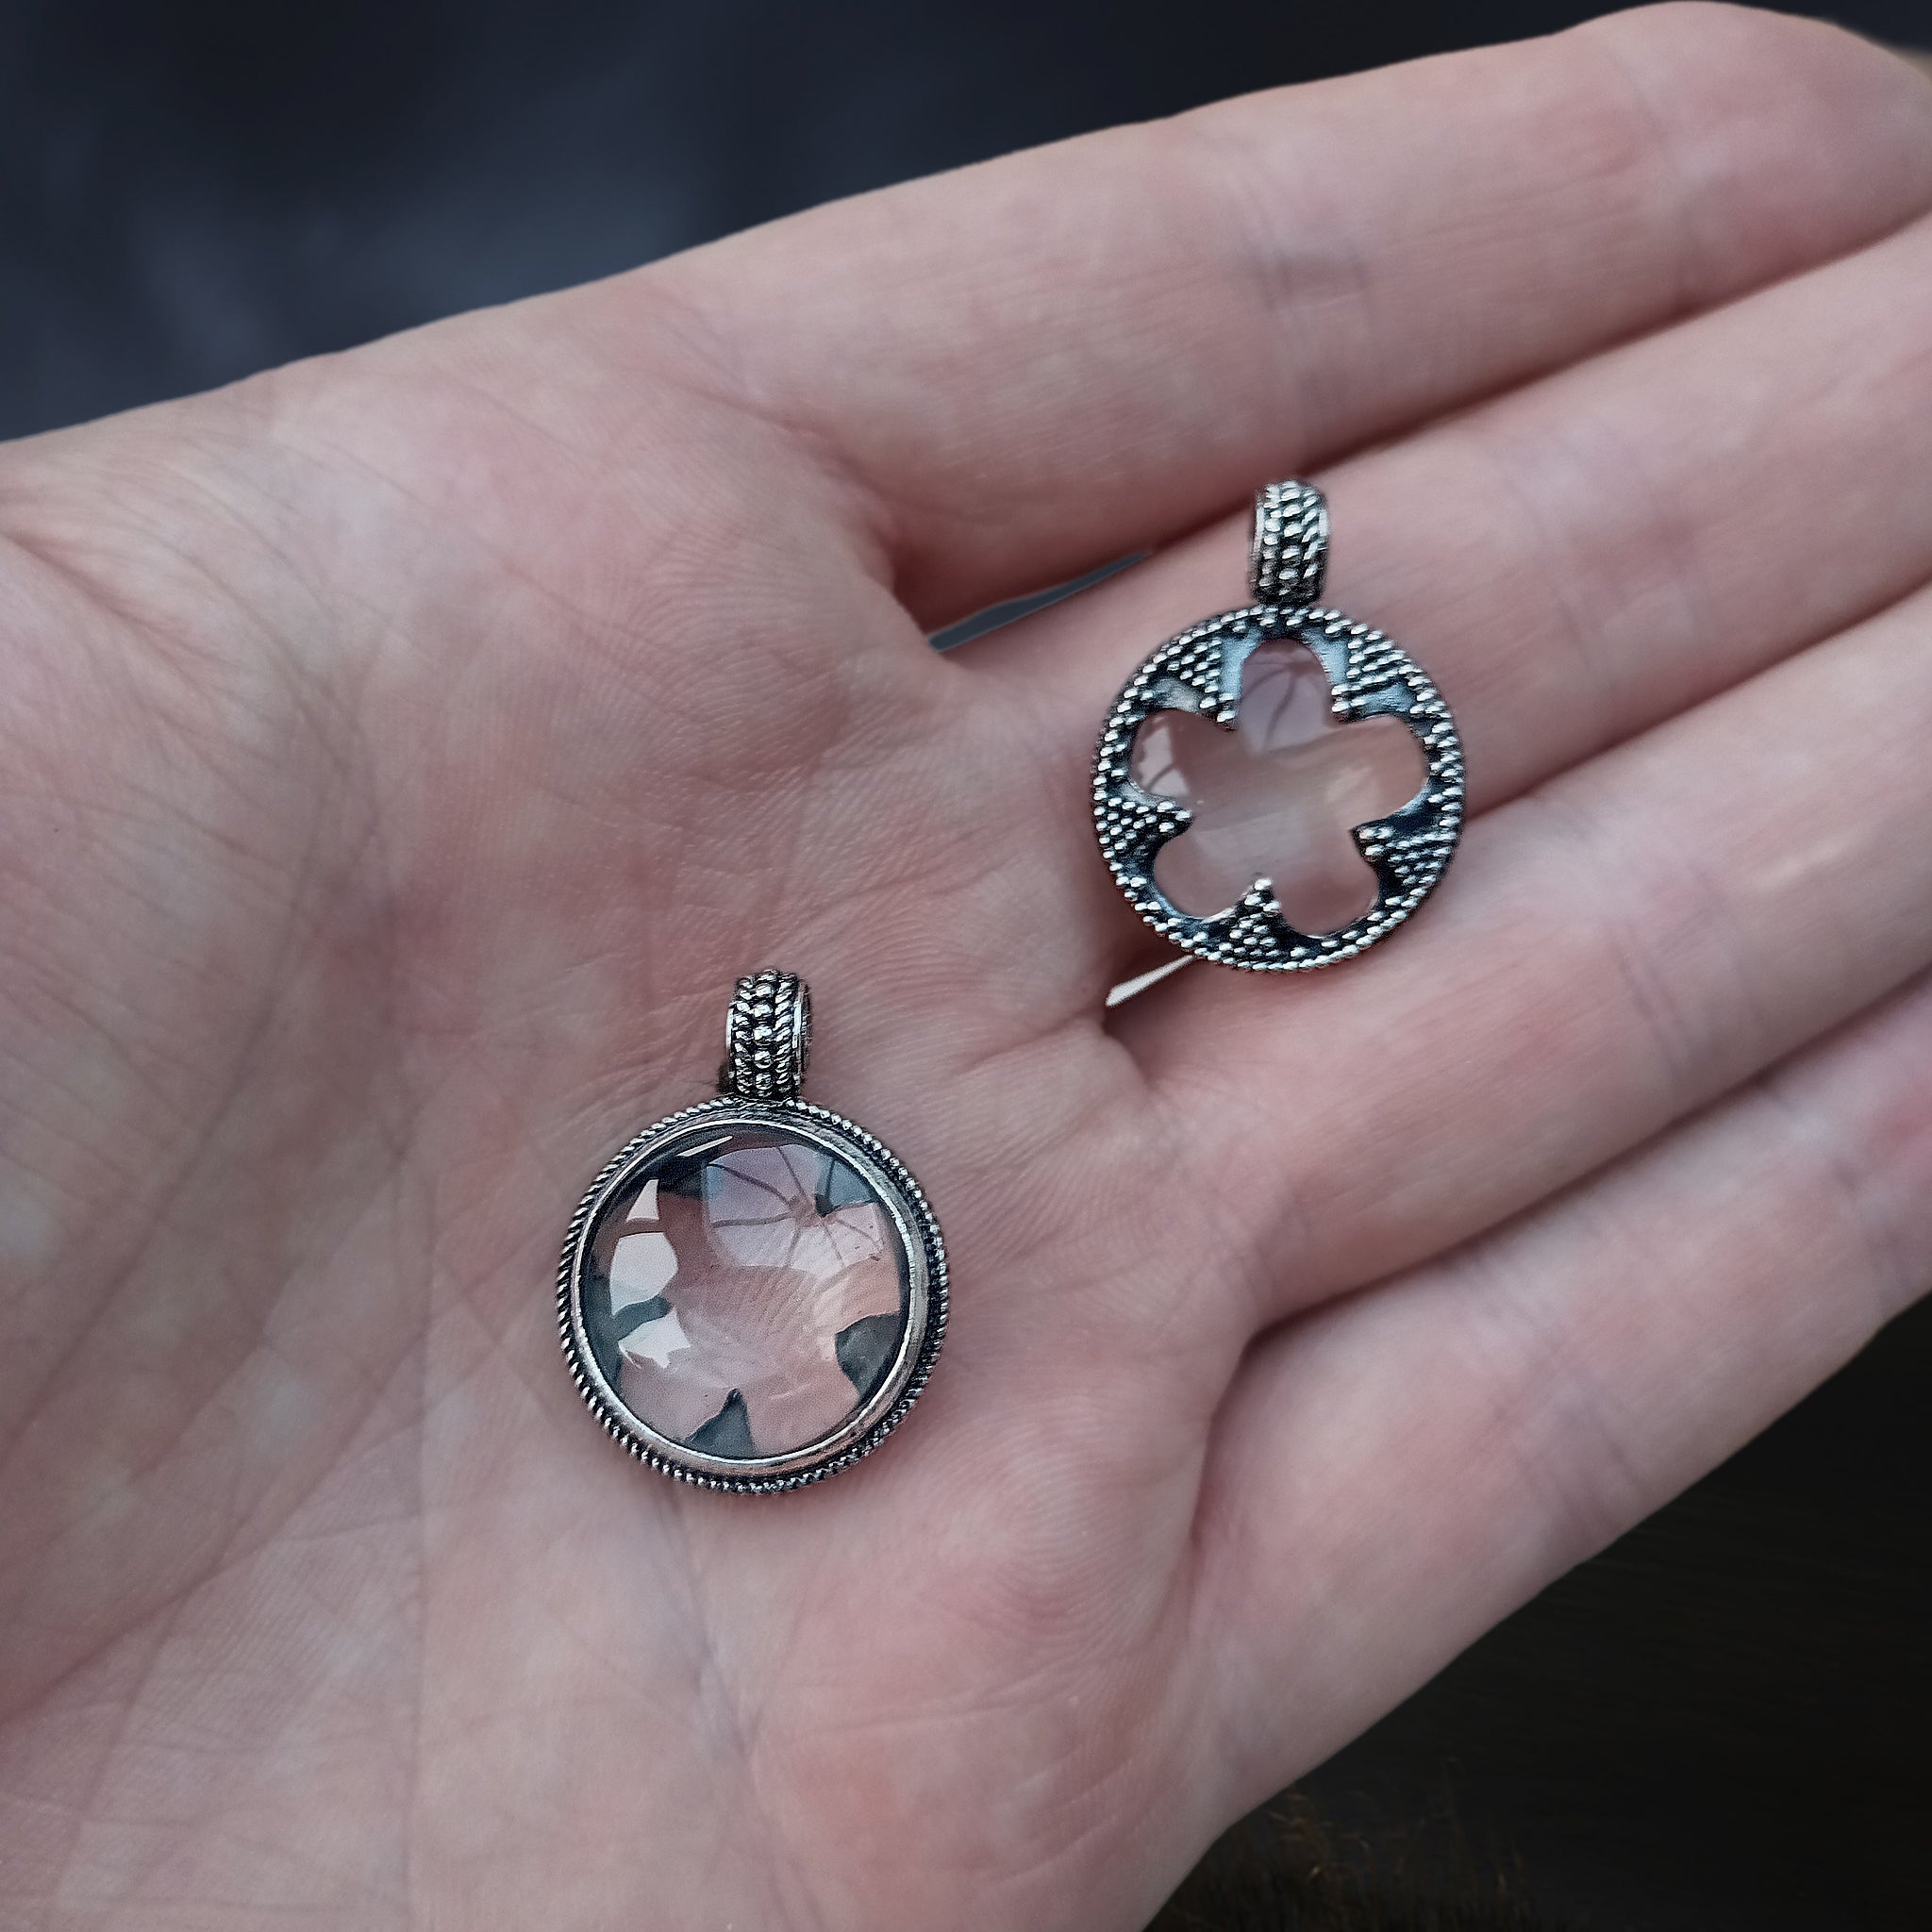 Small Silver Gotland Crystal Lens Pendants in Hand - Front and Back